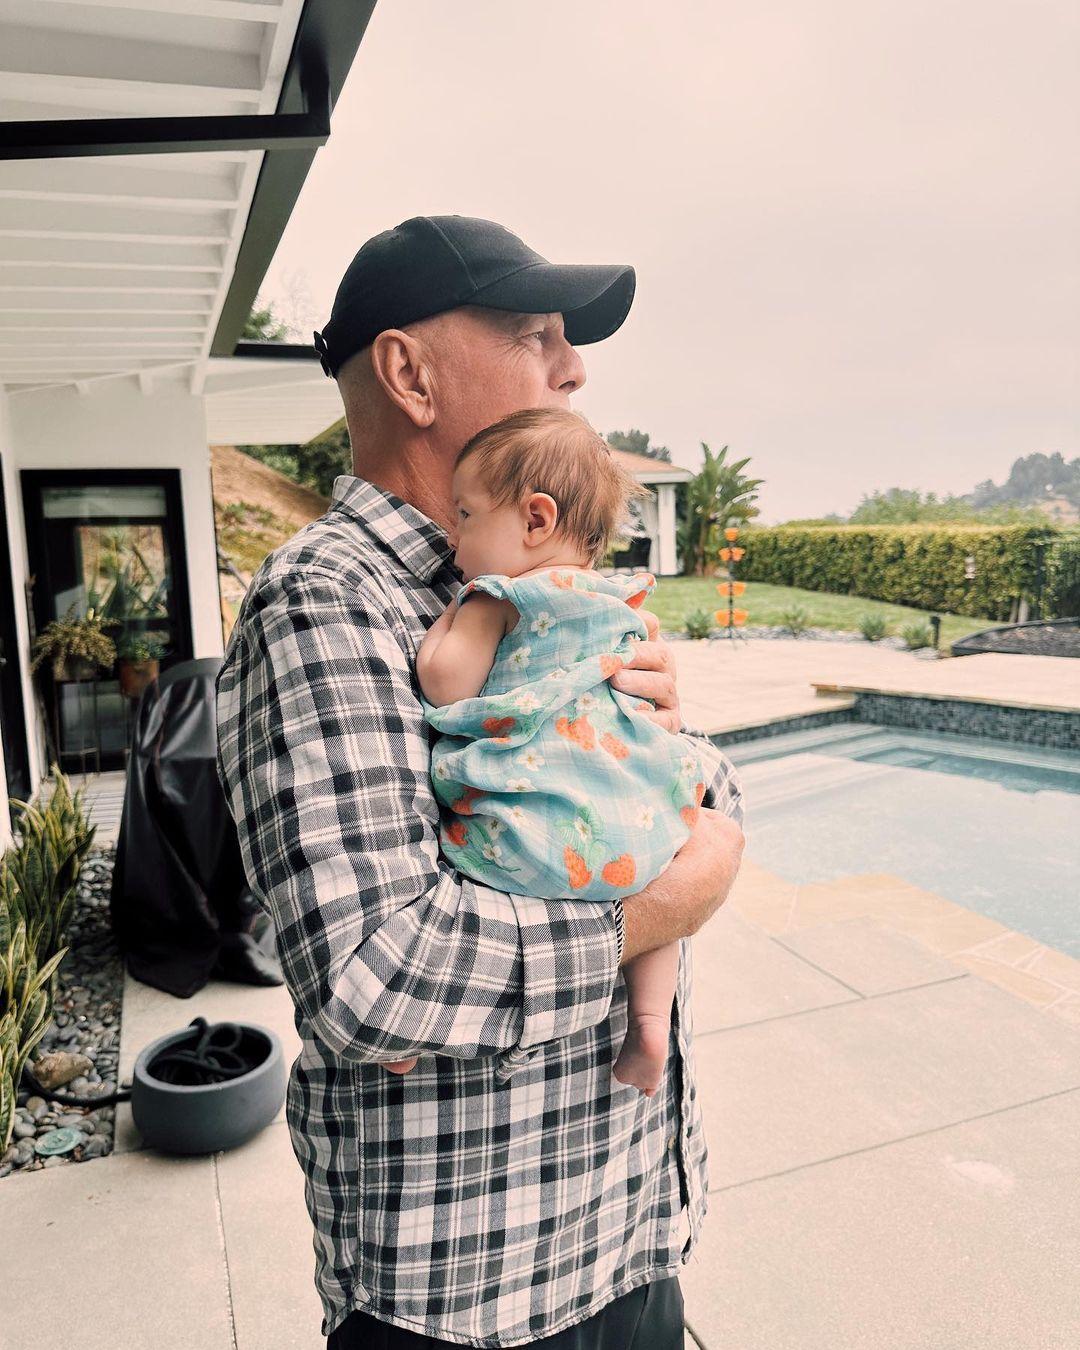 //Bruce Willis with his granddaughter